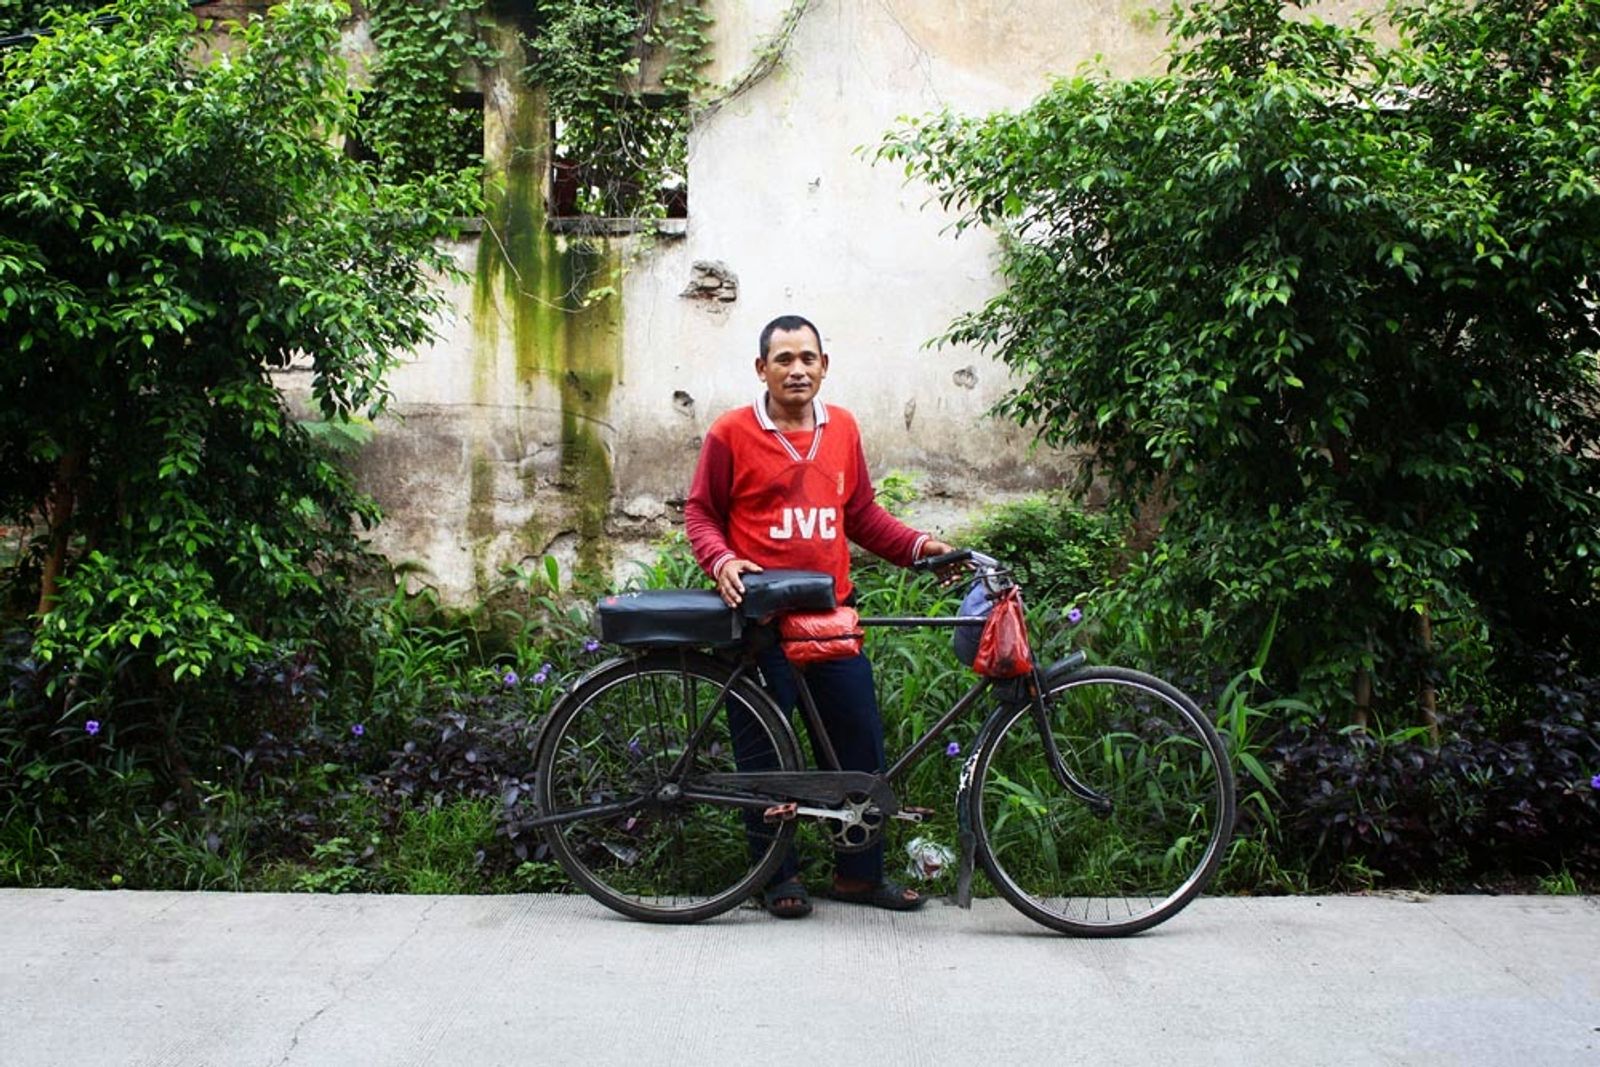 © idealita ismanto - Image from the Bicycle Ojek photography project